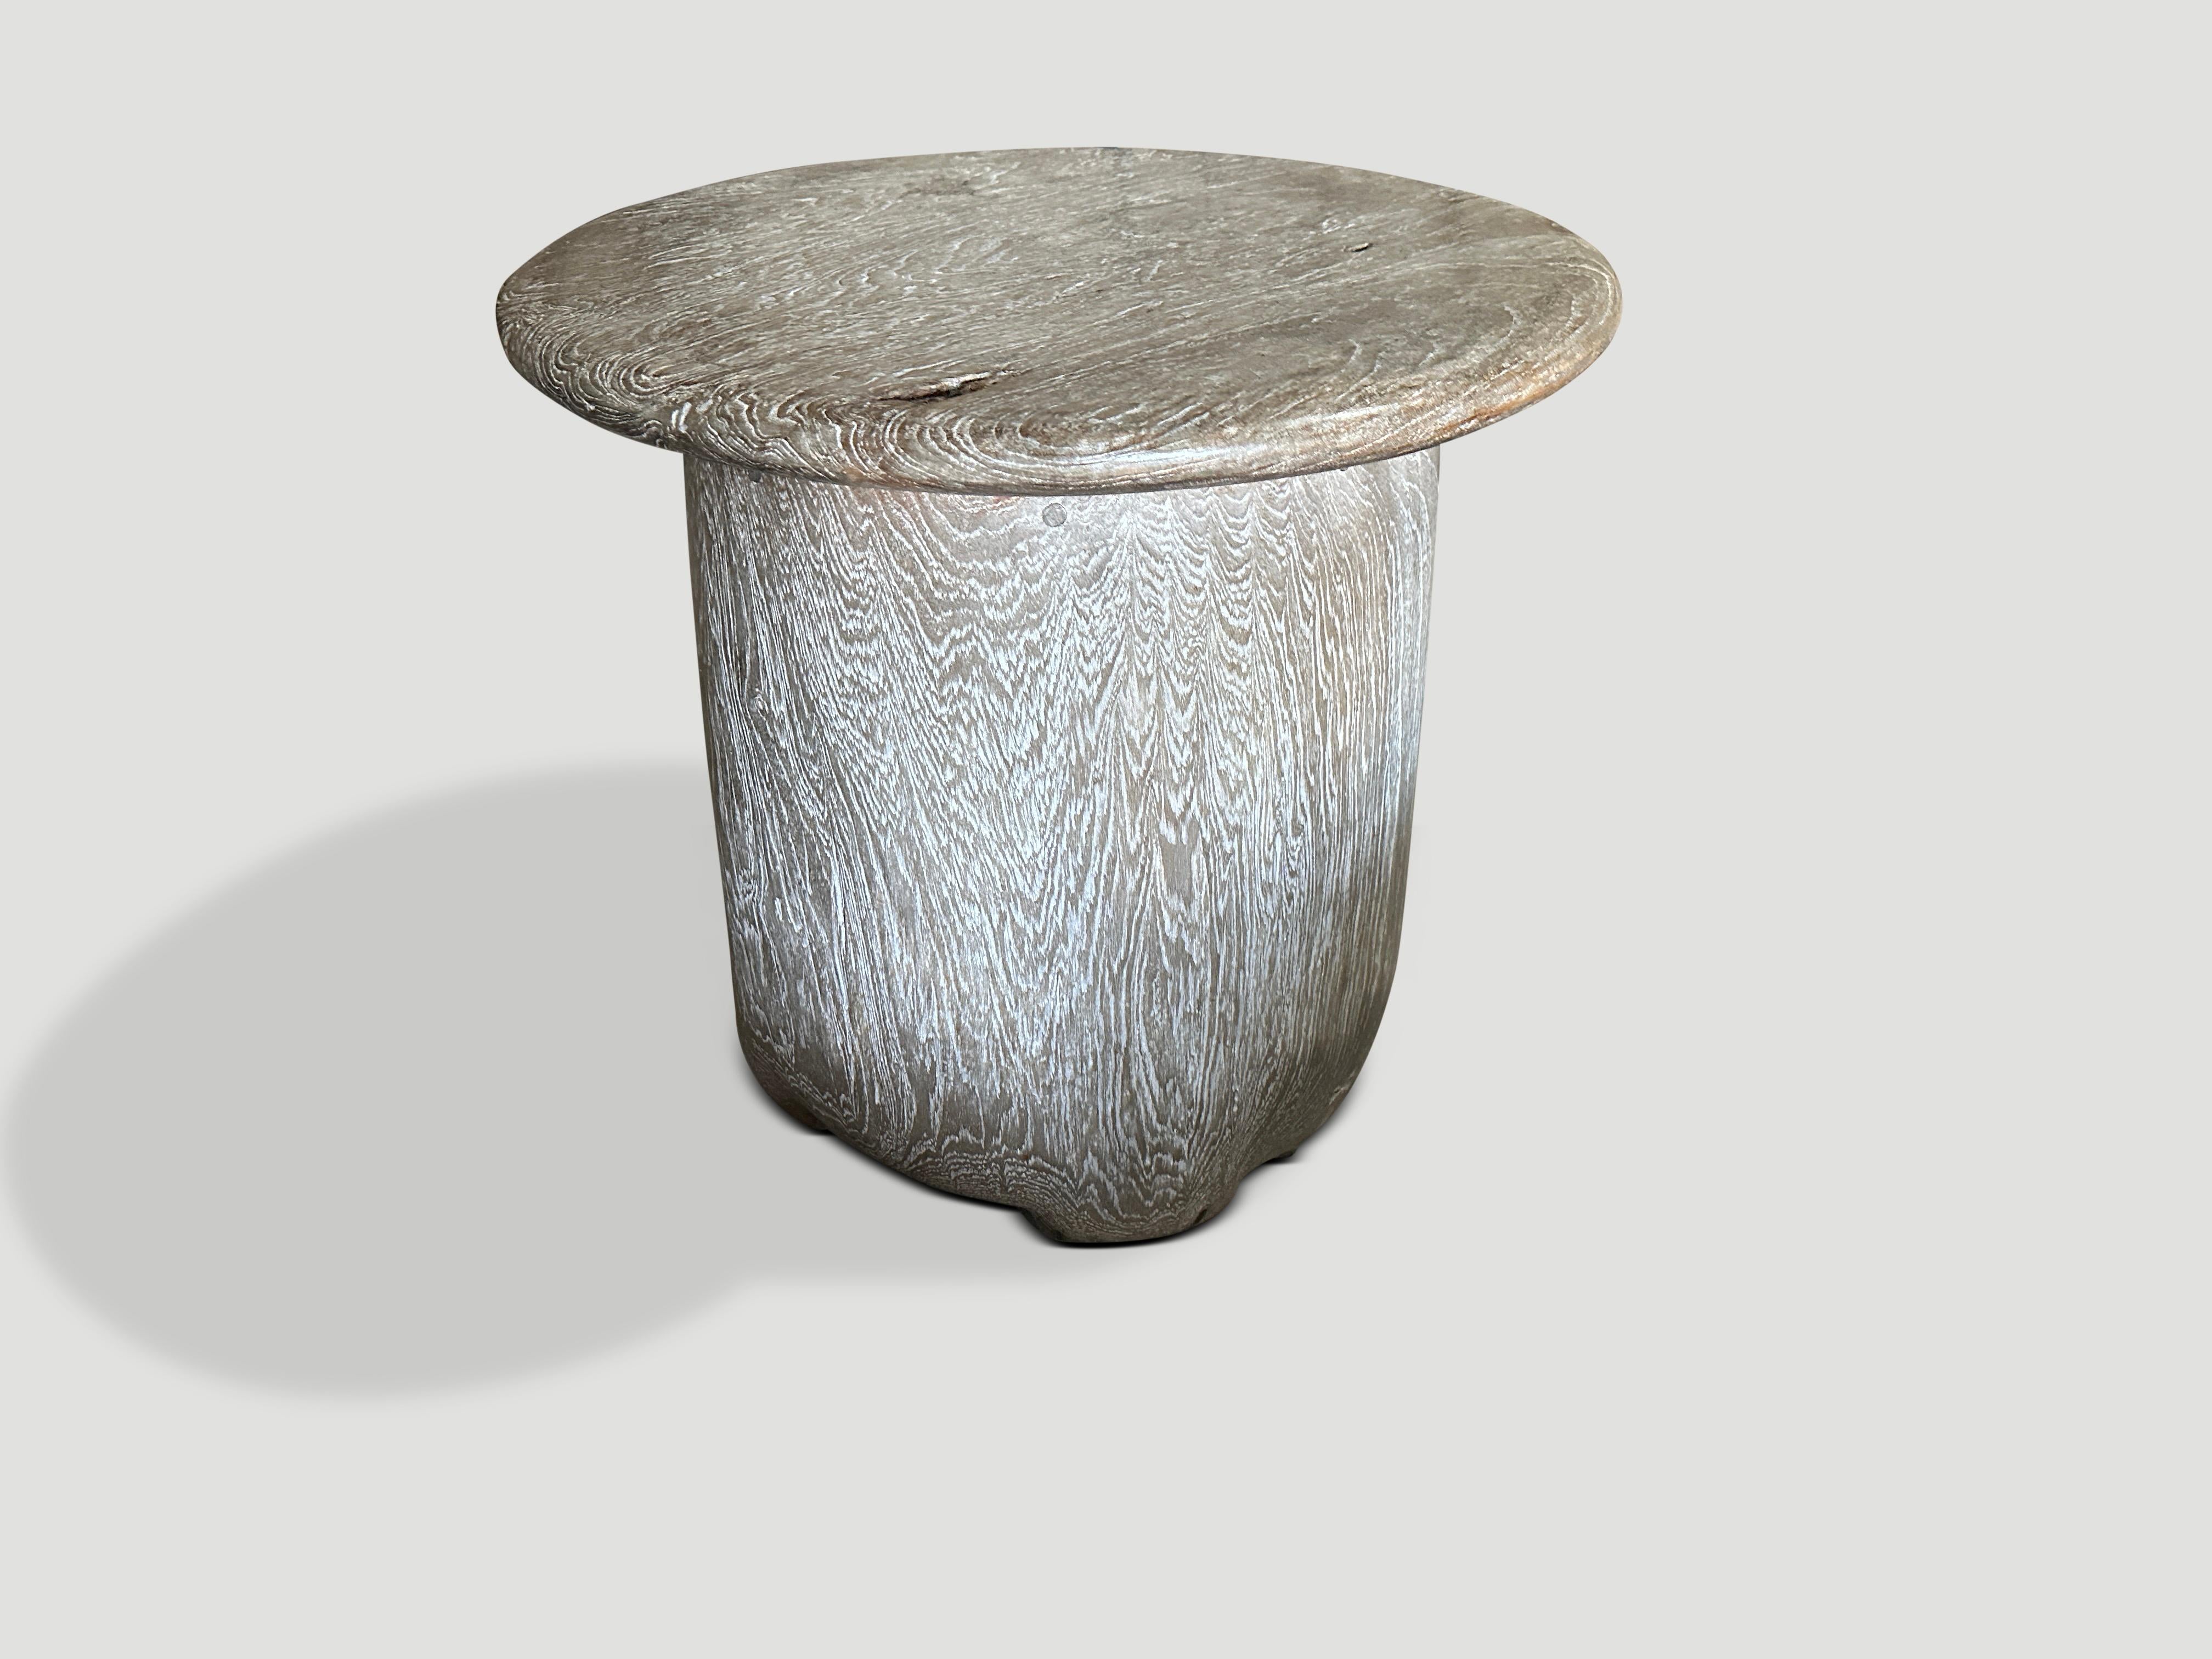 A beautiful antique drum style base with a three inch thick exquisite bevelled round top. Perfect as a side table or entry table. We added a translucent grey stain and a ceruse finish revealing the impressive wood grain. It’s all in the details.